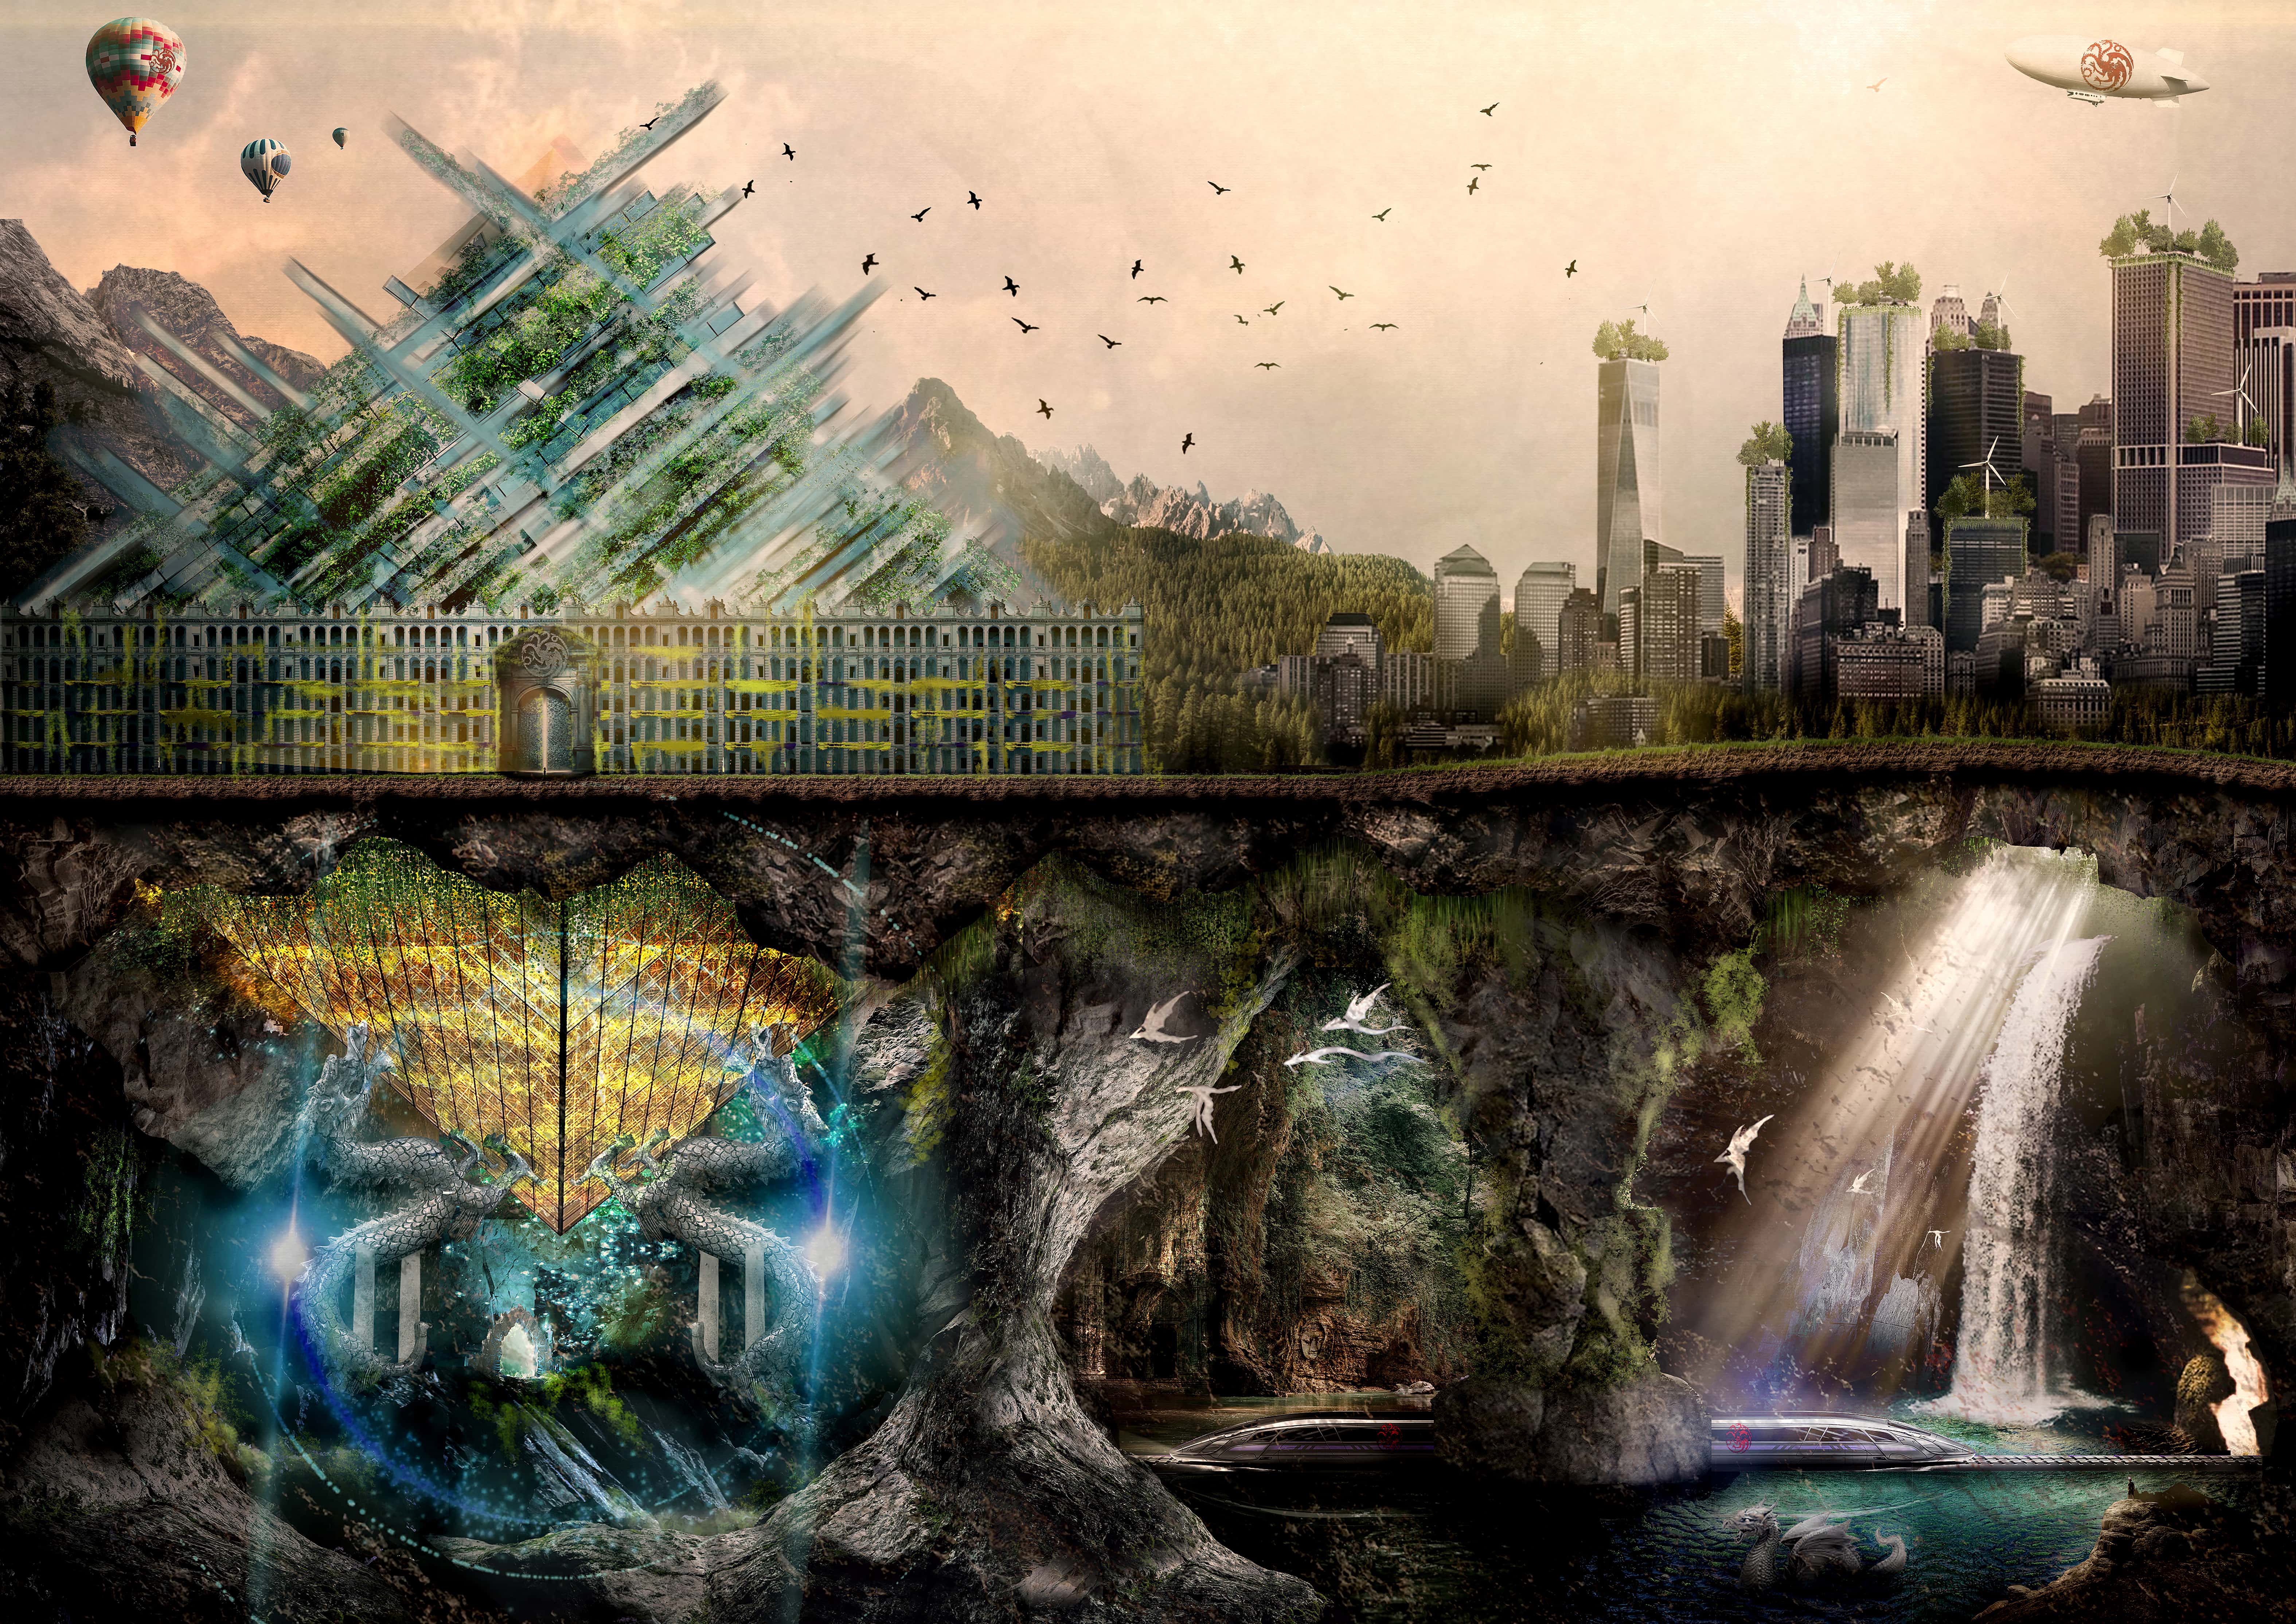 Downunder Dragon-Glass Castle. Beneath – Mystery – Sustainability – Cave-Metro – Glass. James Vongphrachanh, Davide Chieppa